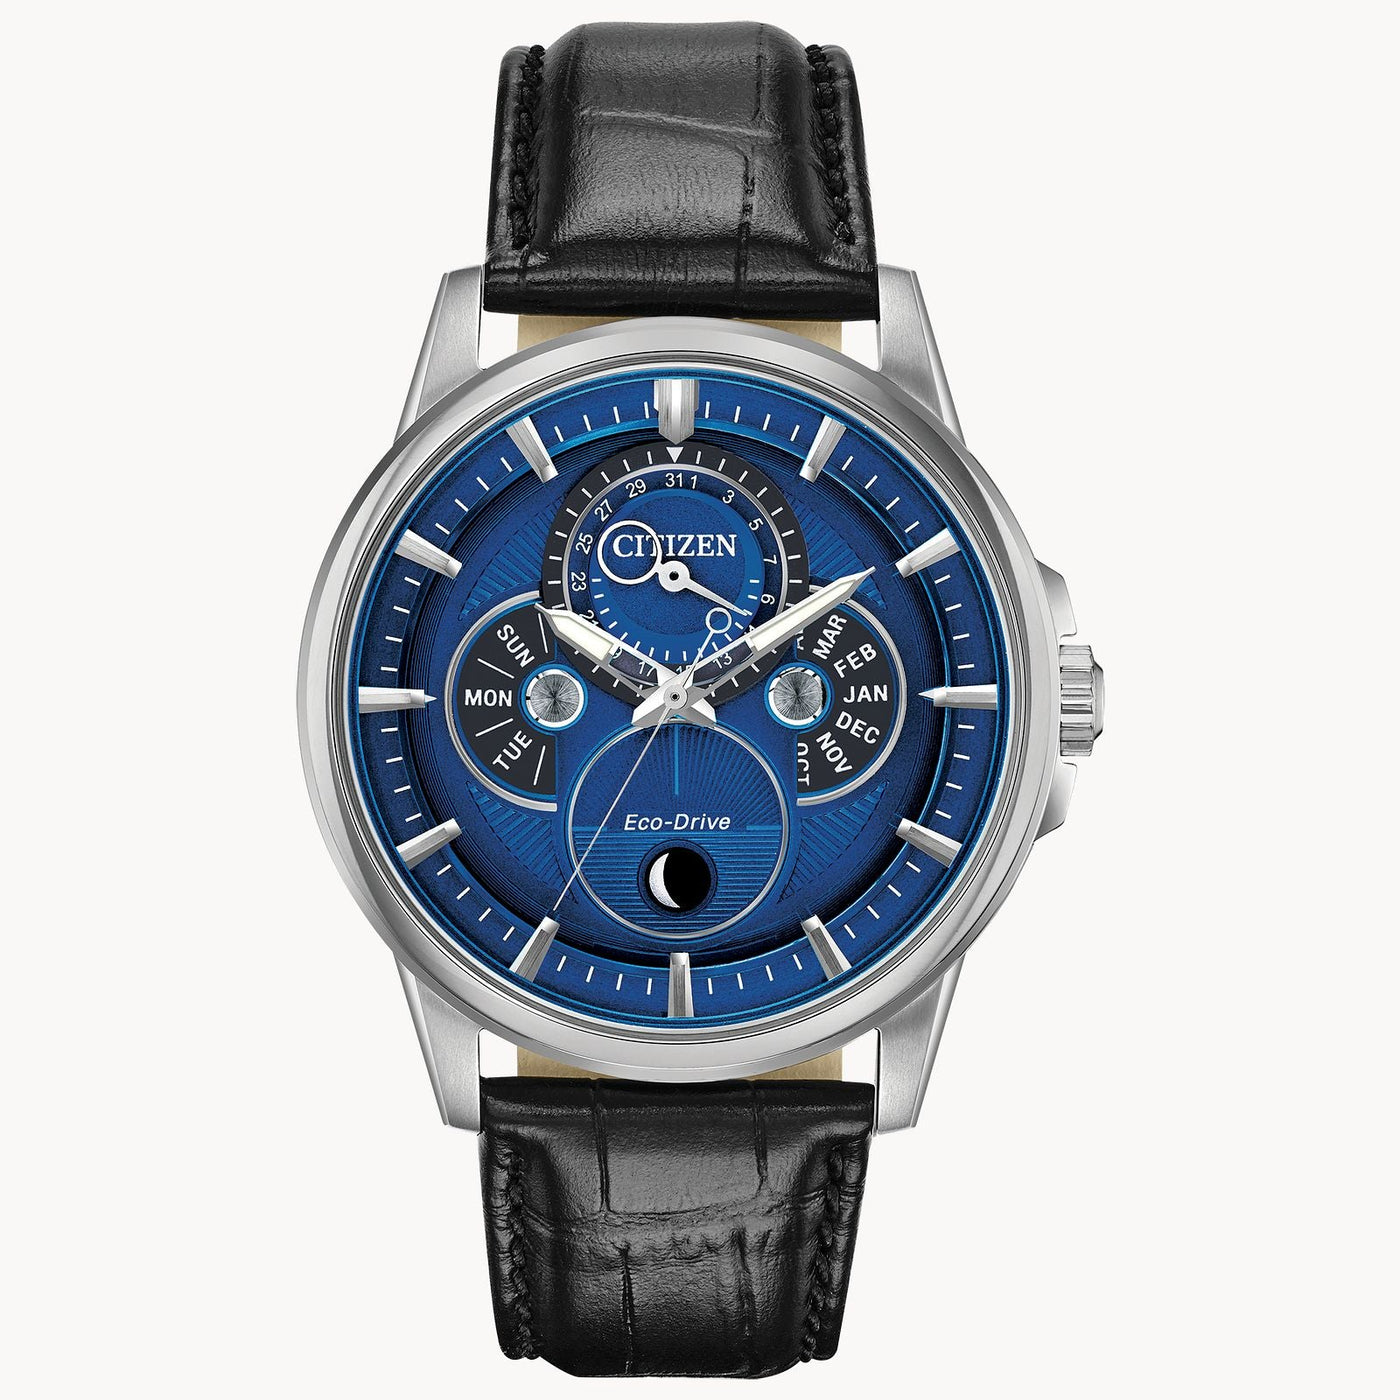 Citizen Calendrier Eco-Drive Stainless Steel Watch with a Cobalt Blue Dial and Black Leather Band